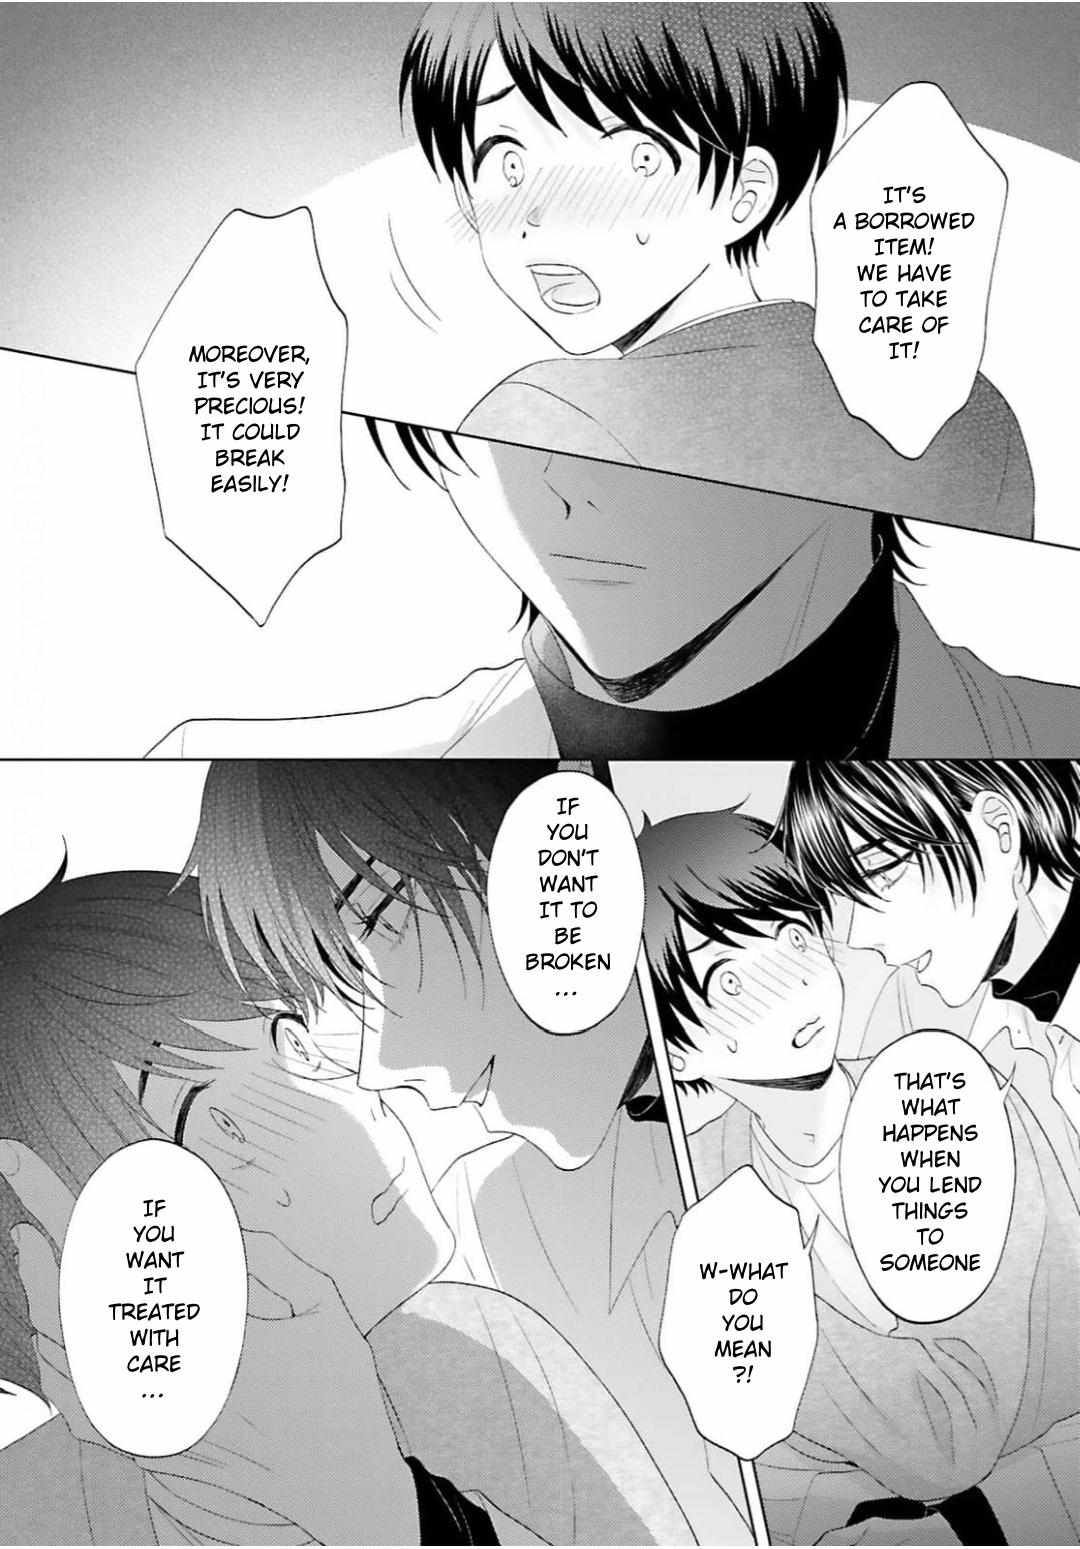 My Cutie Pie -An Ordinary Boy And His Gorgeous Childhood Friend- 〘Official〙 - chapter 11 - #4